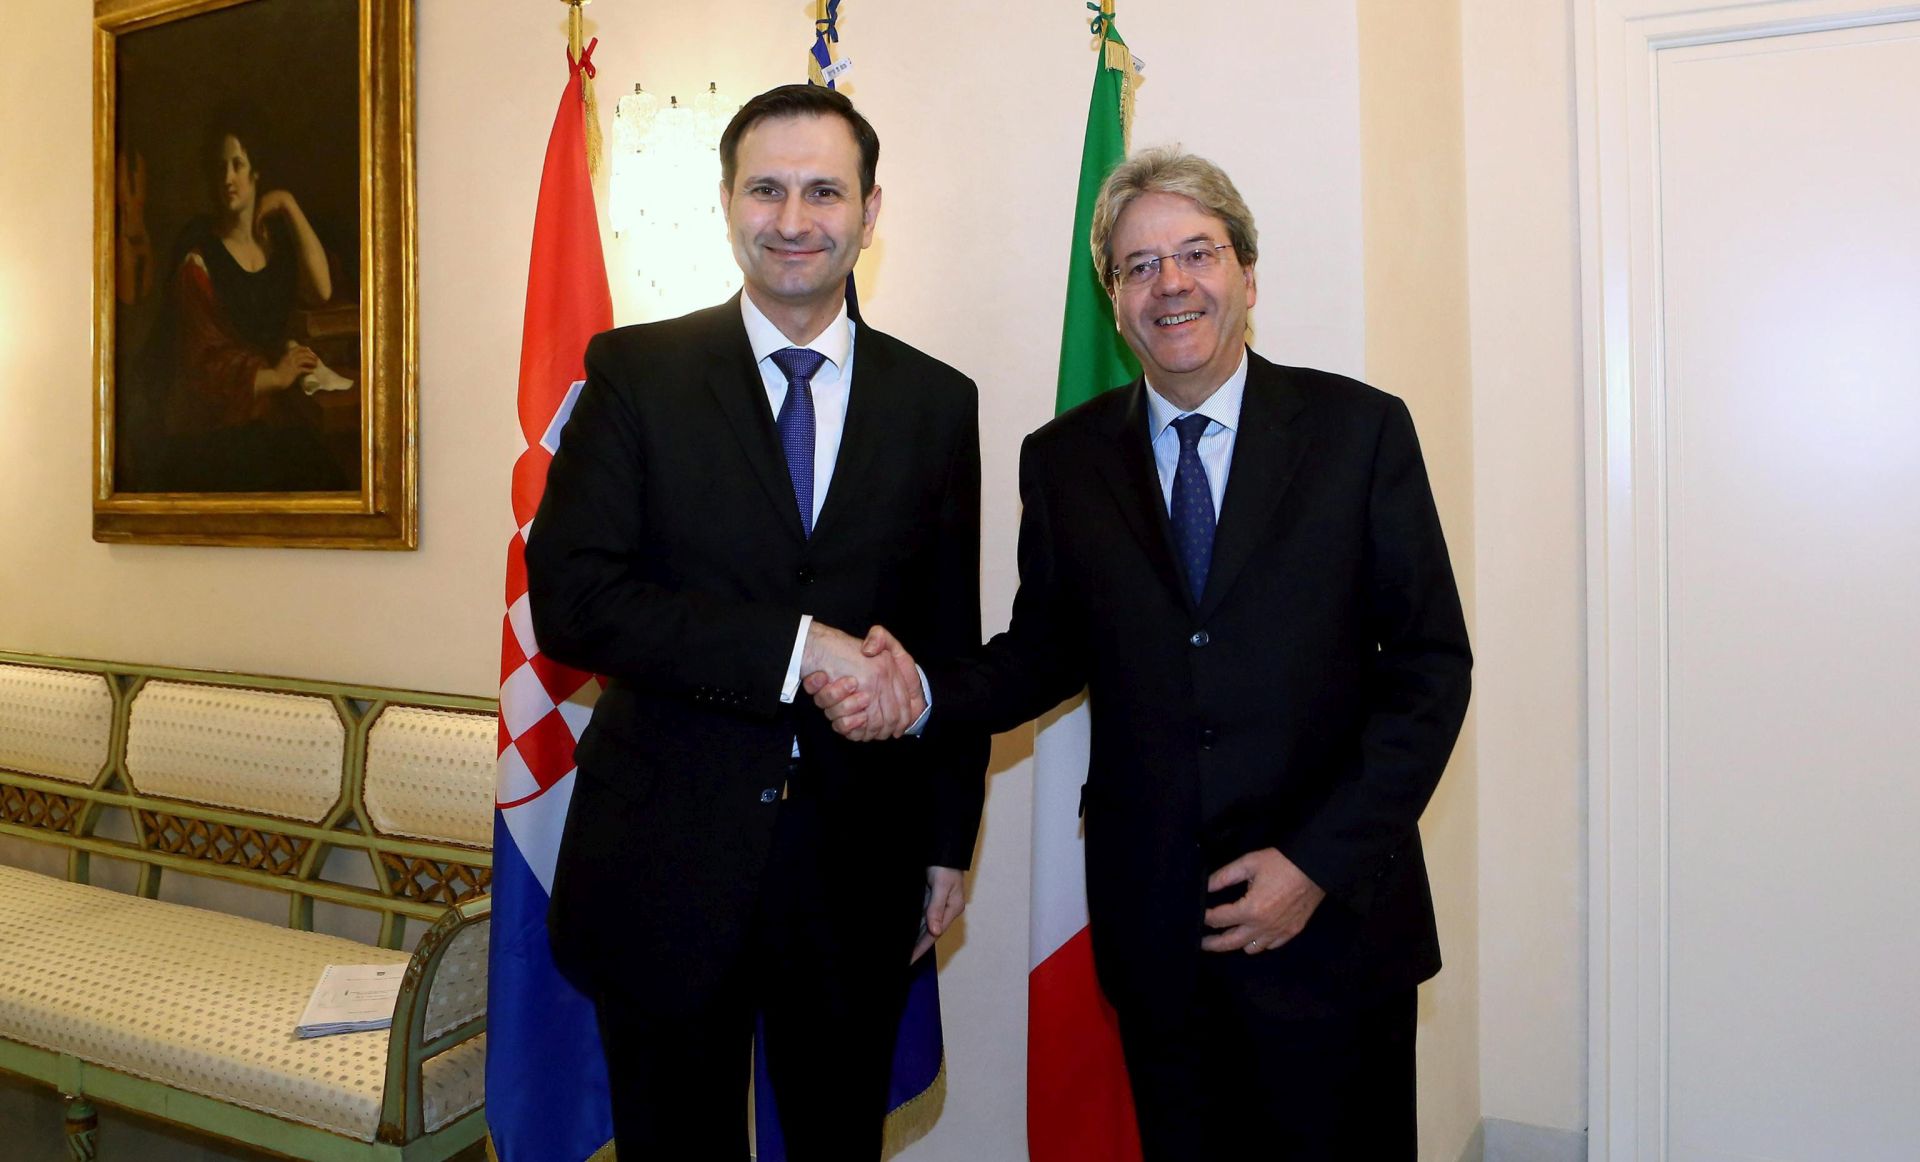 epa05178226 Italian Foreign Minister Paolo Gentiloni (R) welcomes Croatian Minister of Foreign and European Affairs Miro Kovac (L) for a meeting in Rome, Italy, 24 February 2016.  EPA/FABIO CAMPANA